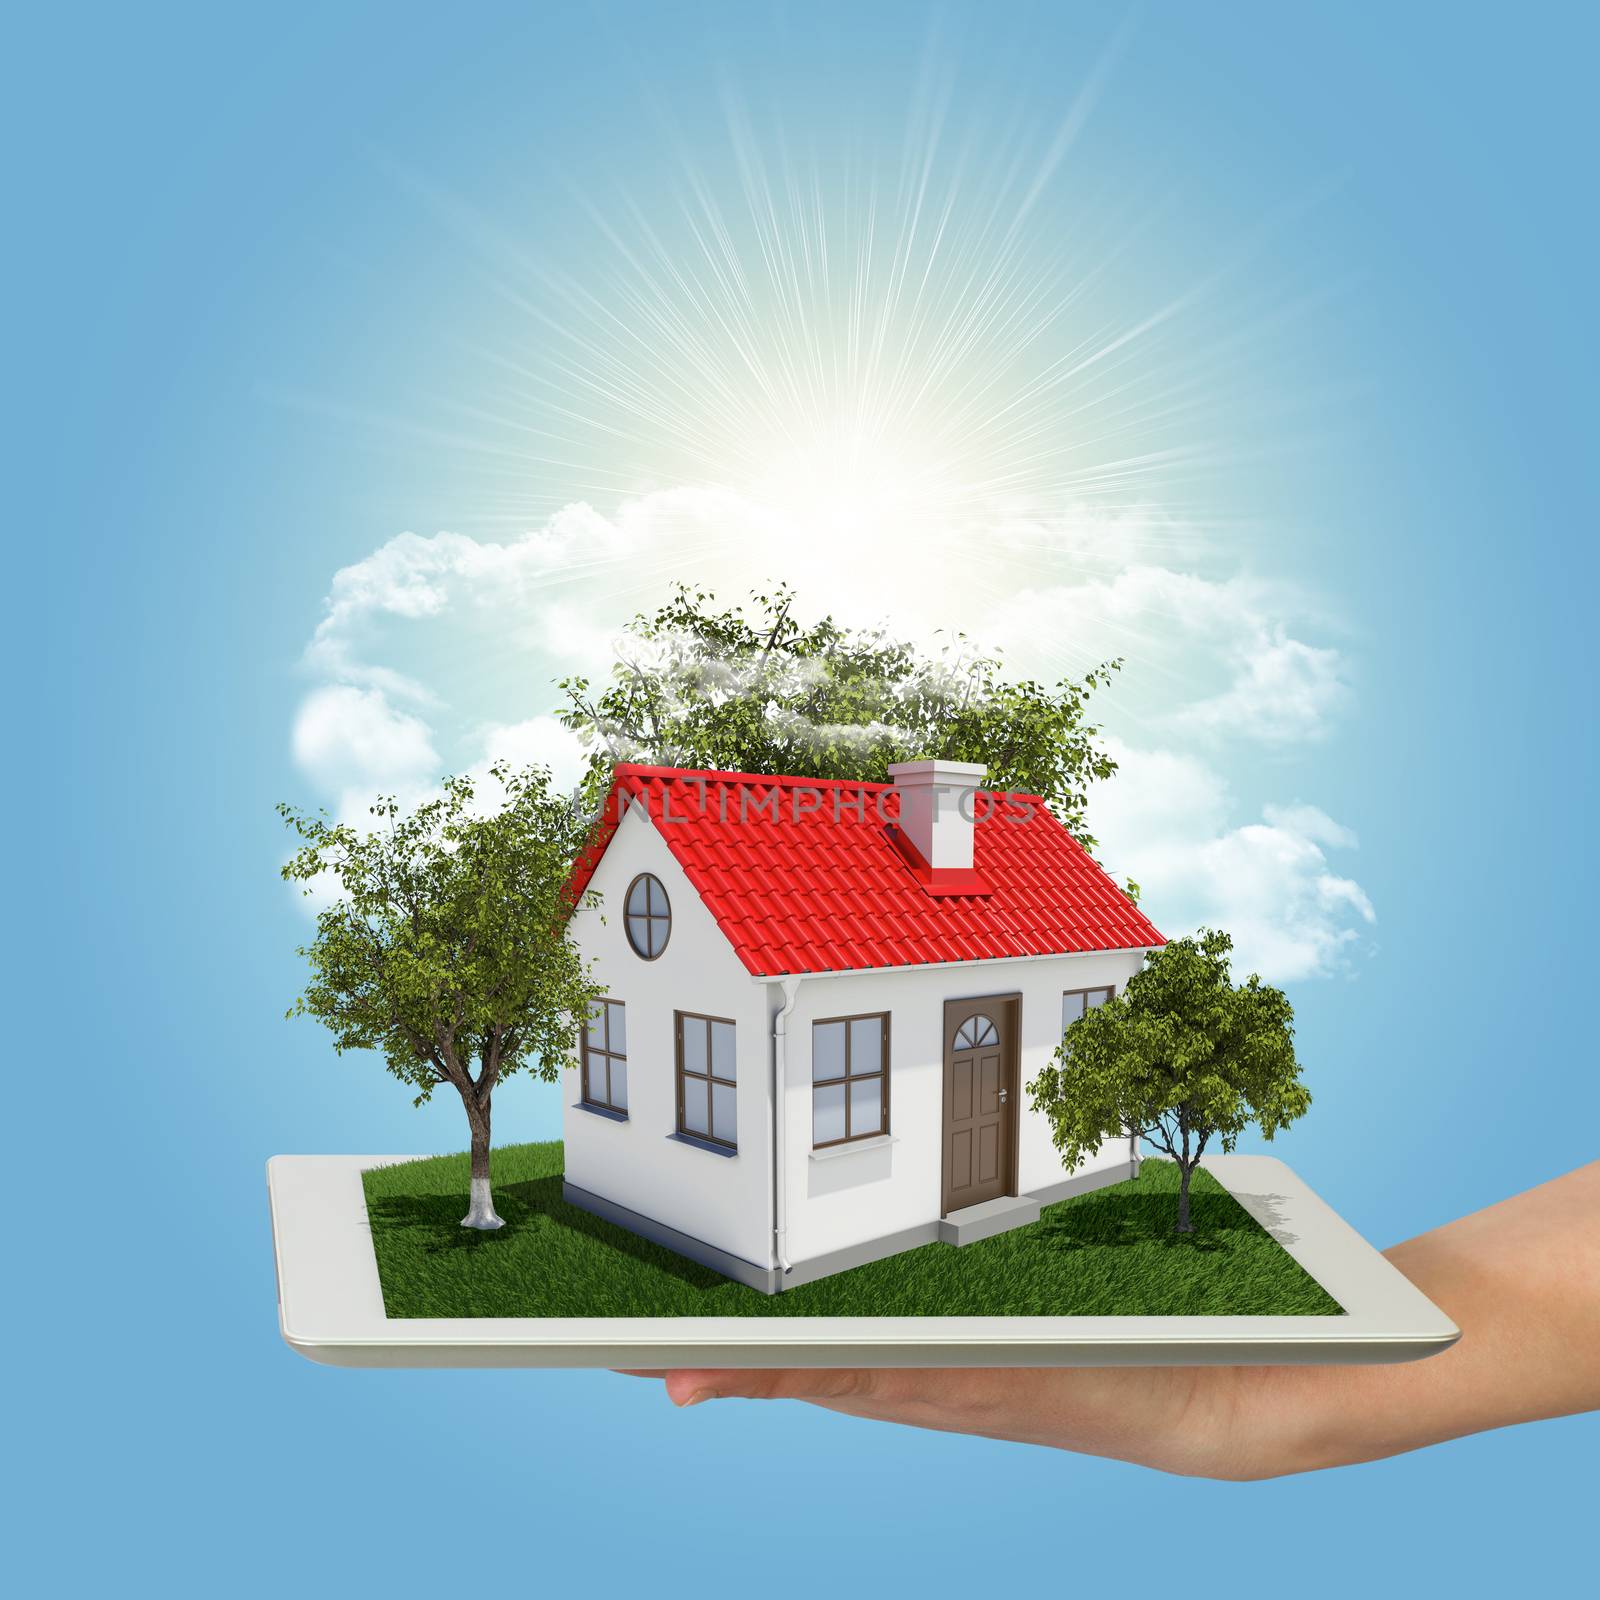 Human hand holding tablet pc with small house and trees. Real estate concept